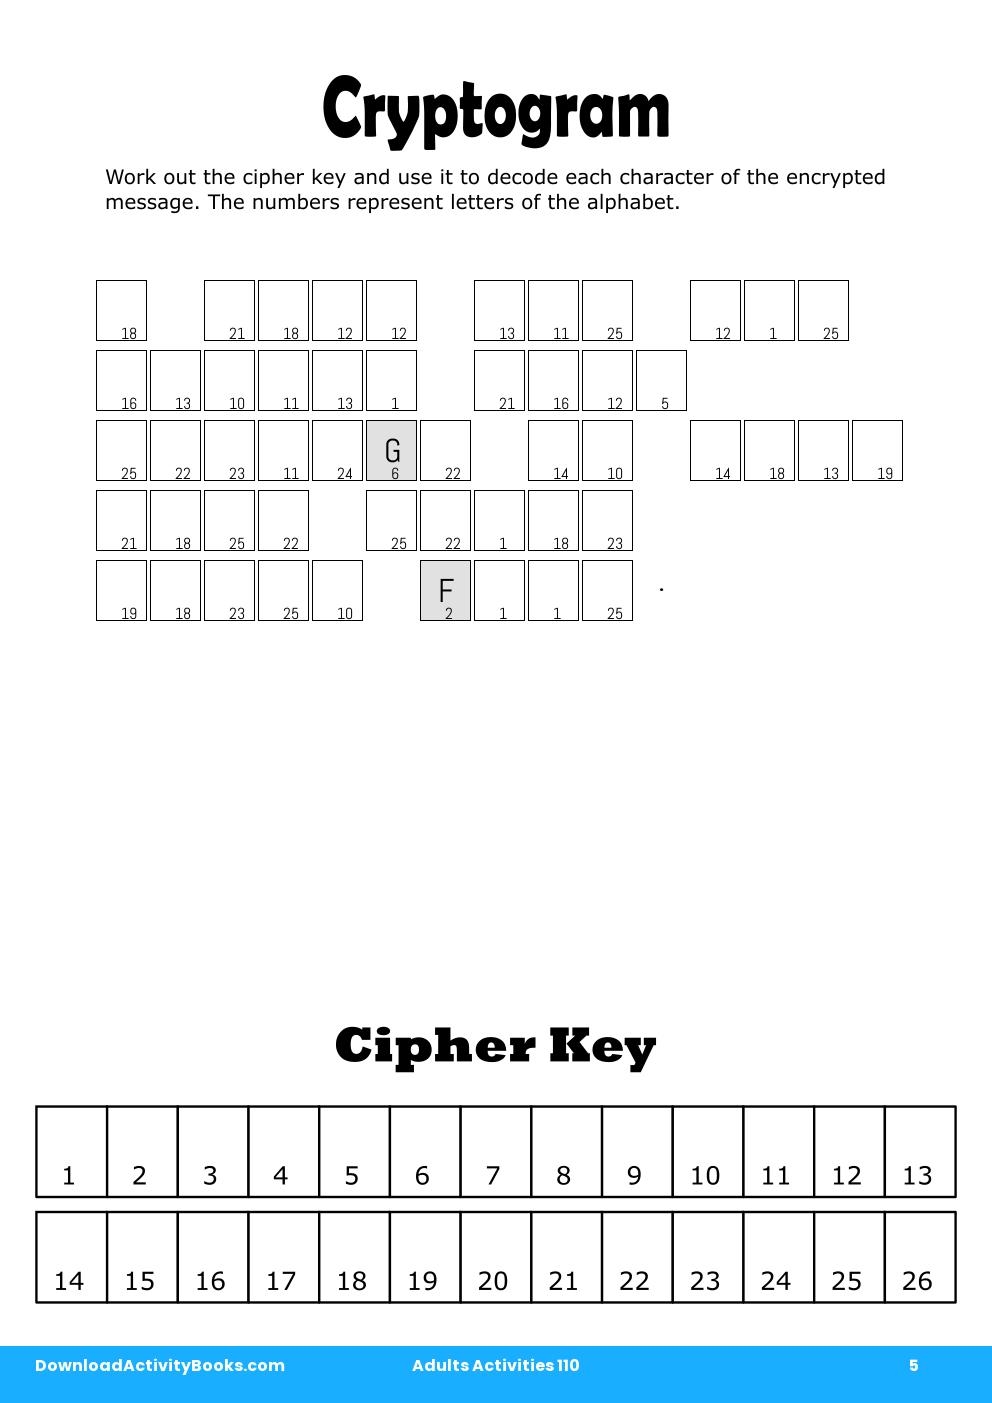 Cryptogram in Adults Activities 110